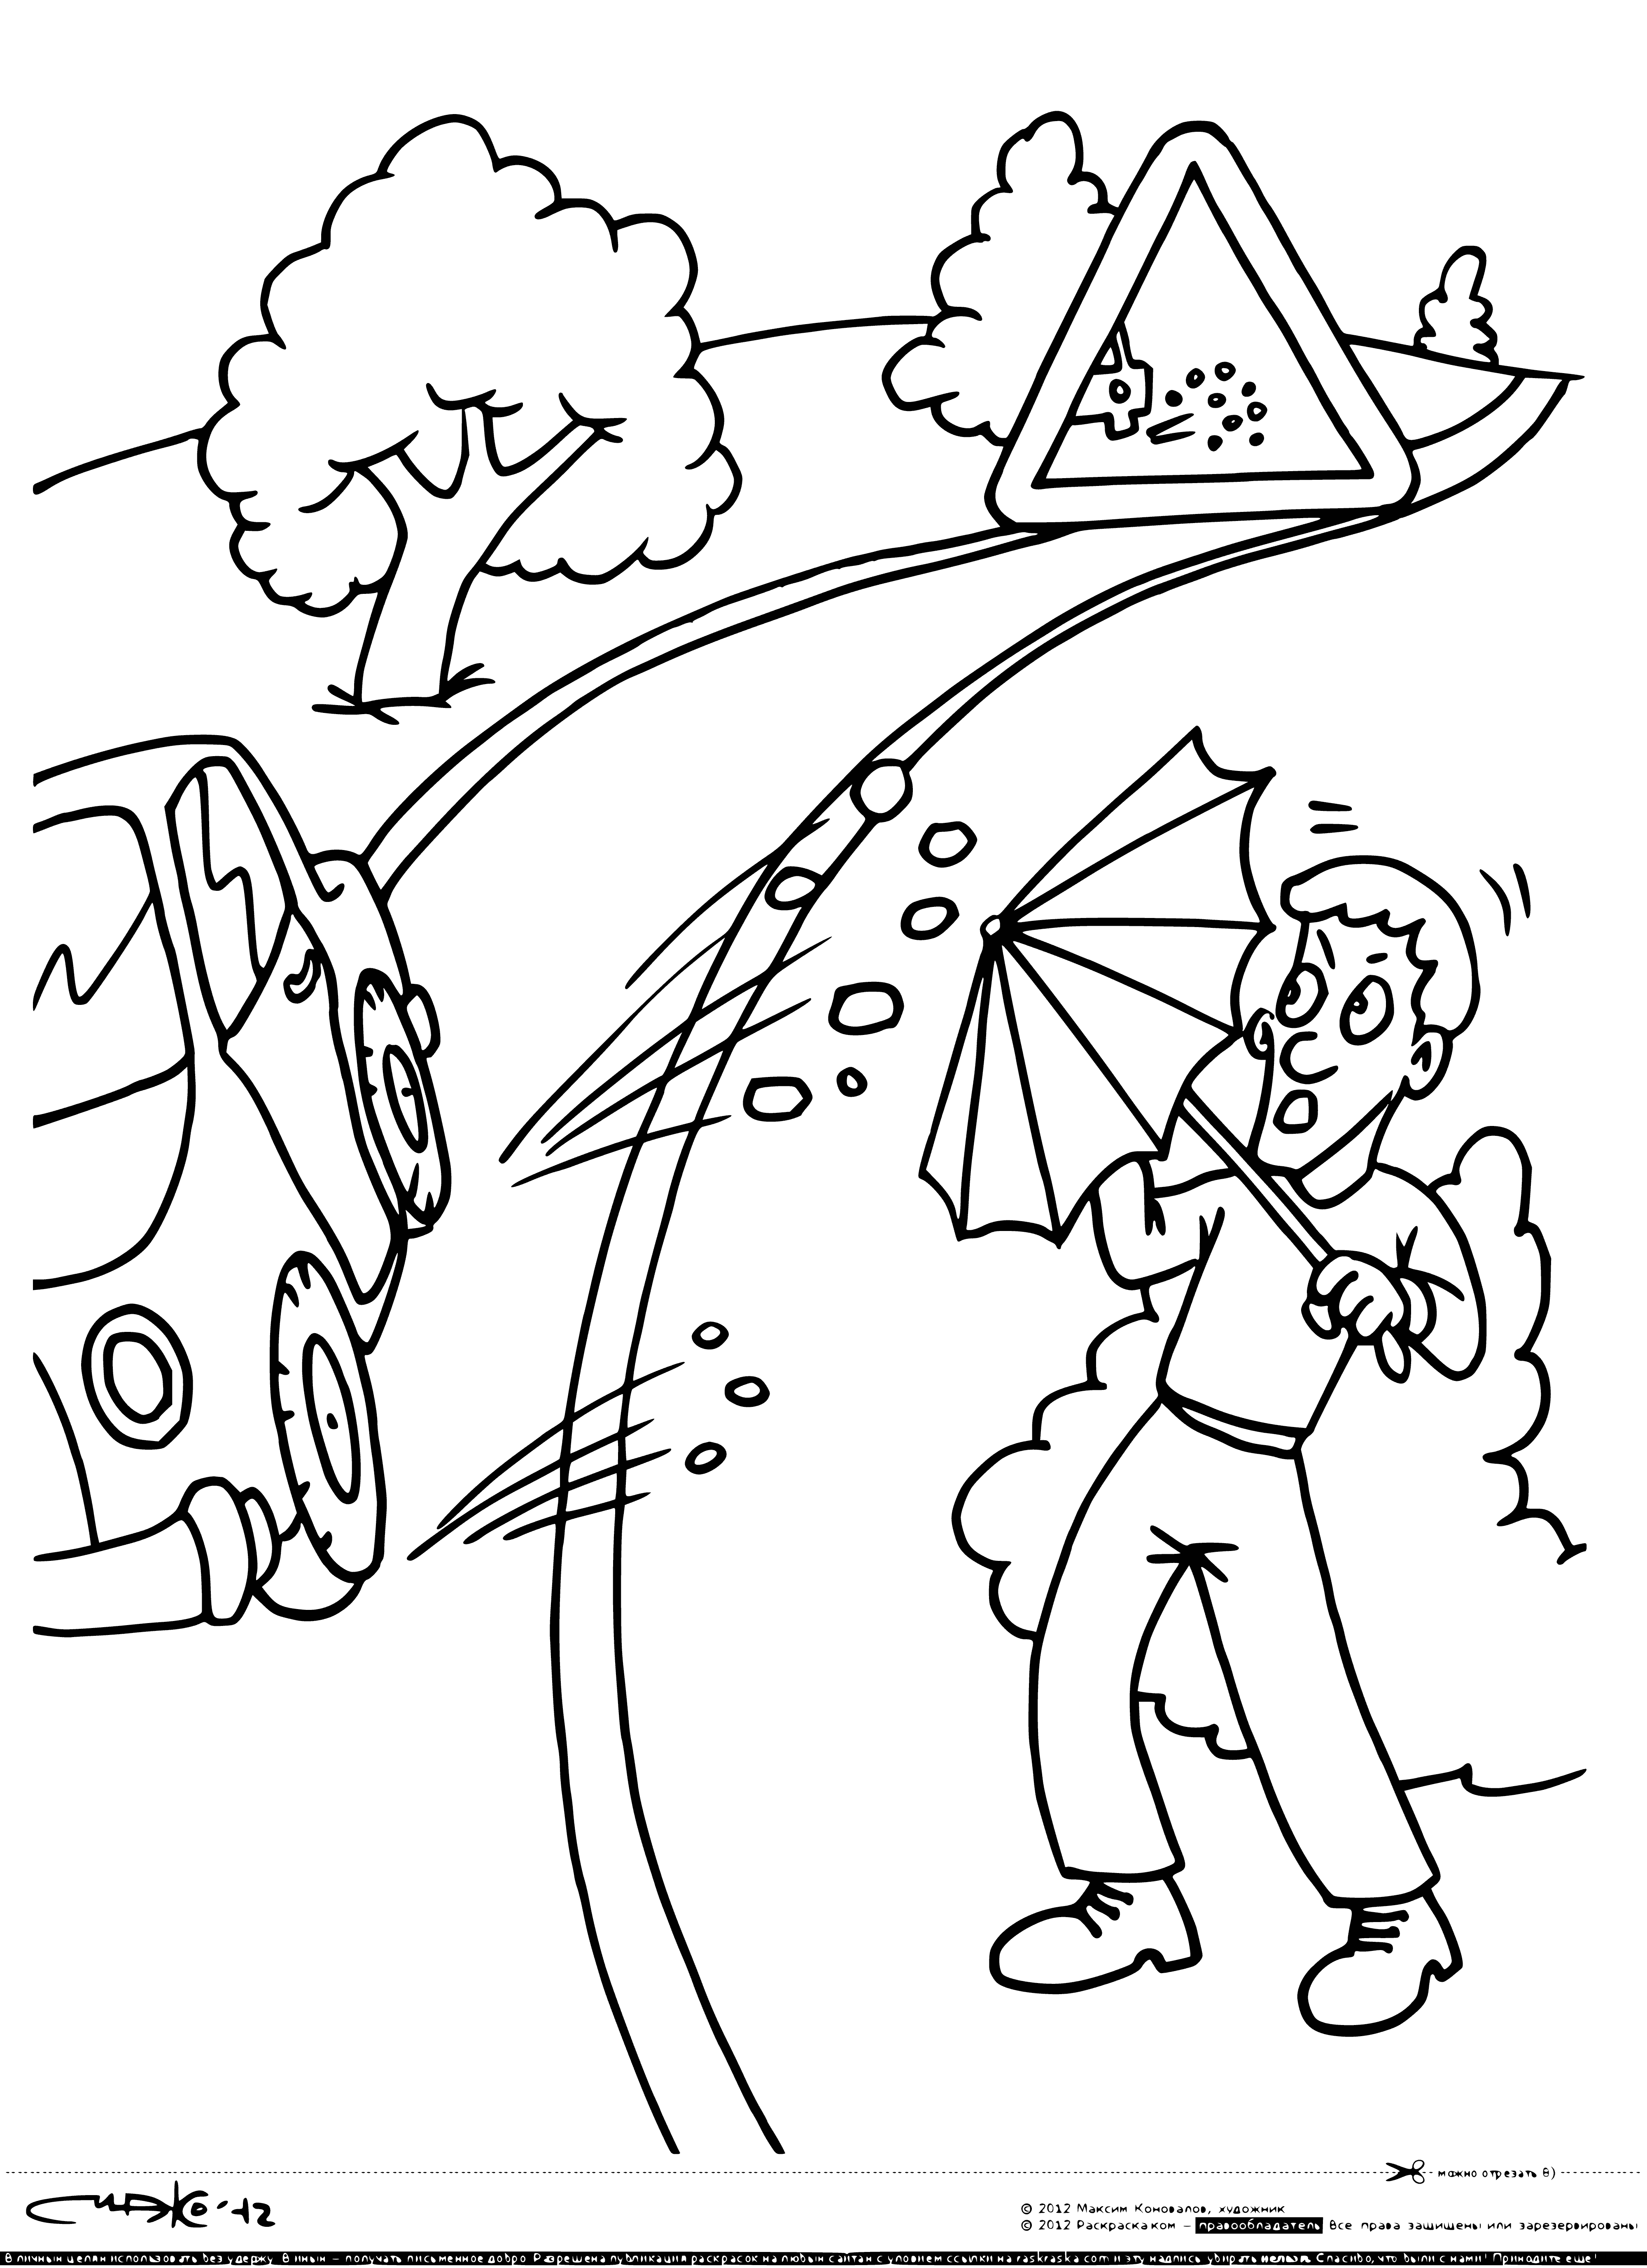 coloring page: Triangular yellow sign with black lettering cautioning drivers: "Ejection of gravel. Traffic rules" #EjectionOfGravel #TrafficRules